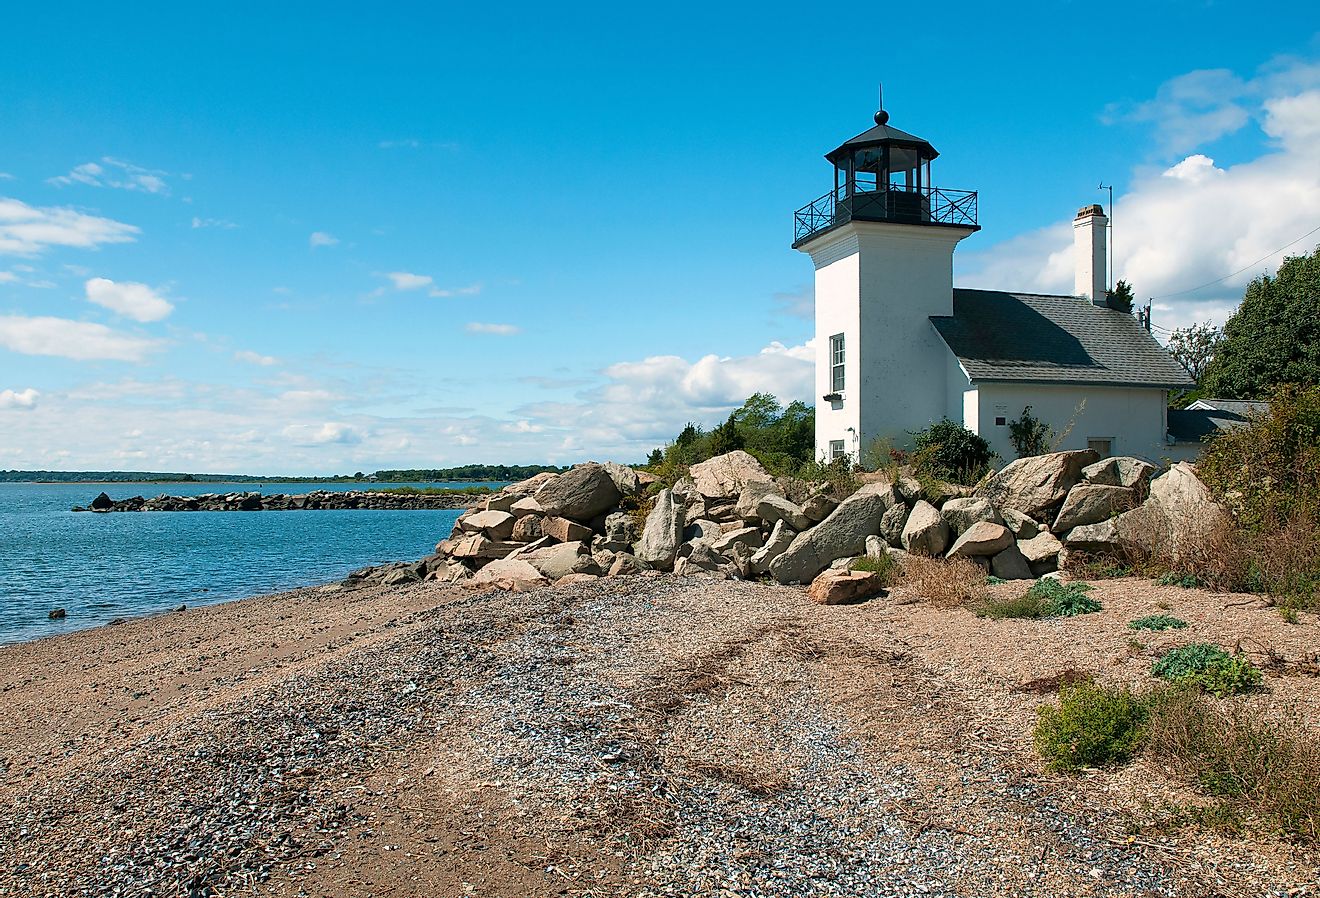 Bristol Ferry lighthouse is surrounded with large boulders to protect the keepers when the tides would rise in Narragansett Bay in Rhode Island.